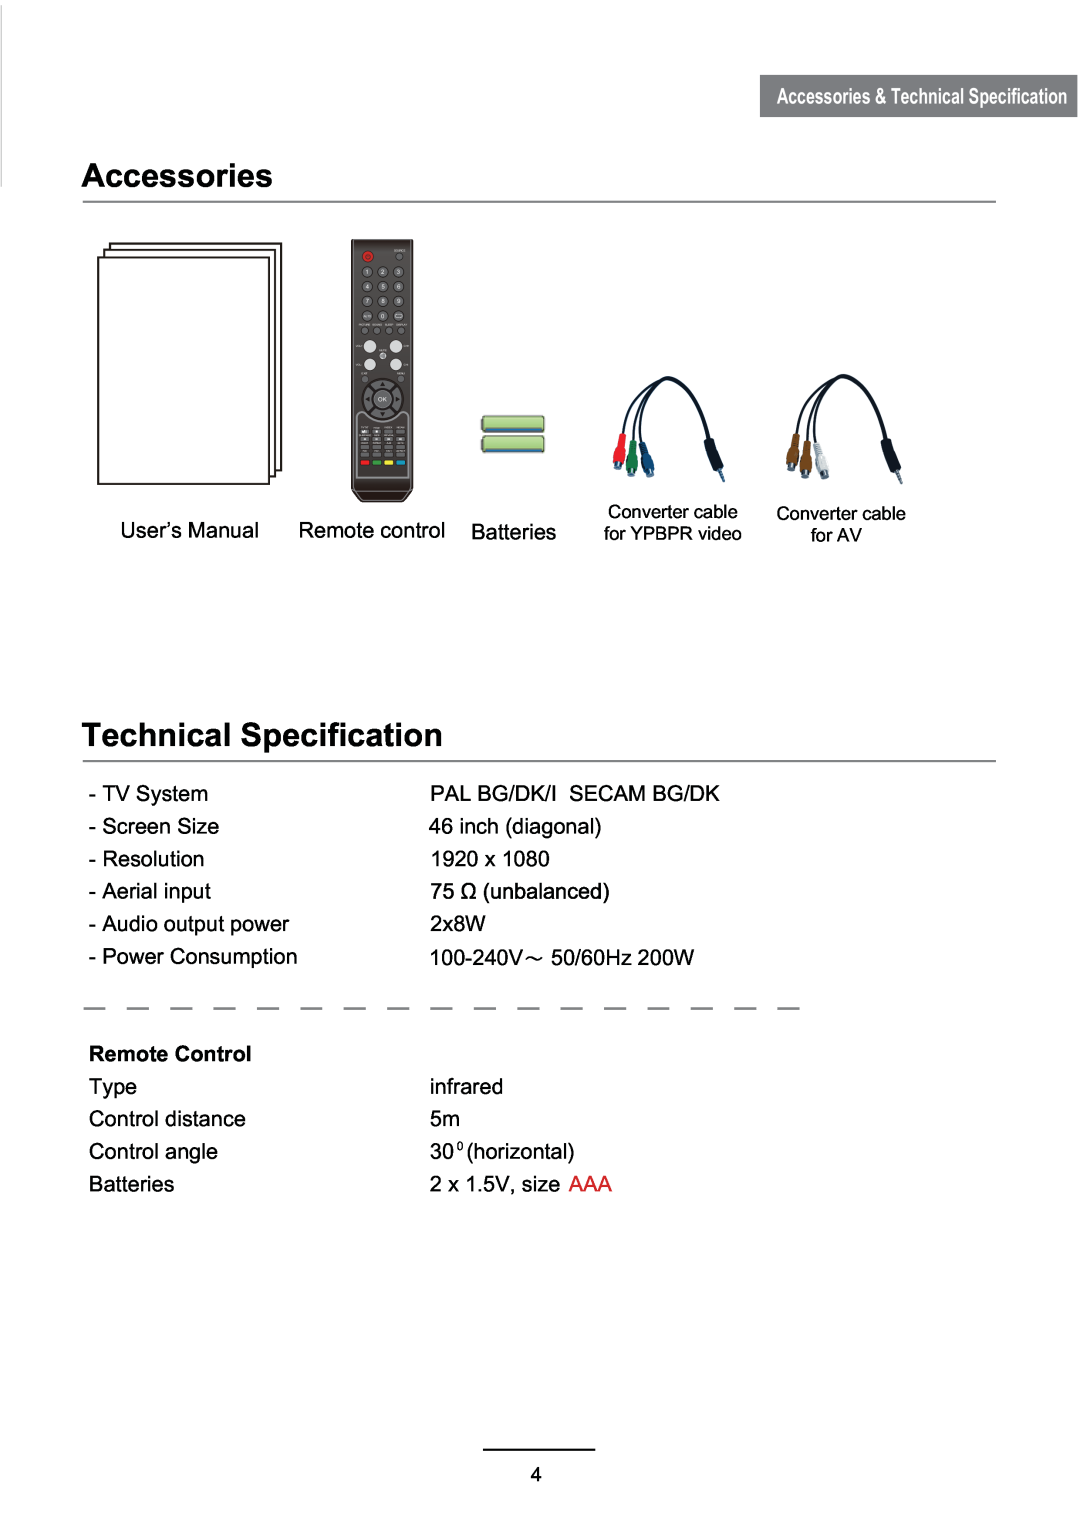 Haier LE46D10F user manual Accessories & Technical Specification, Remote Control 